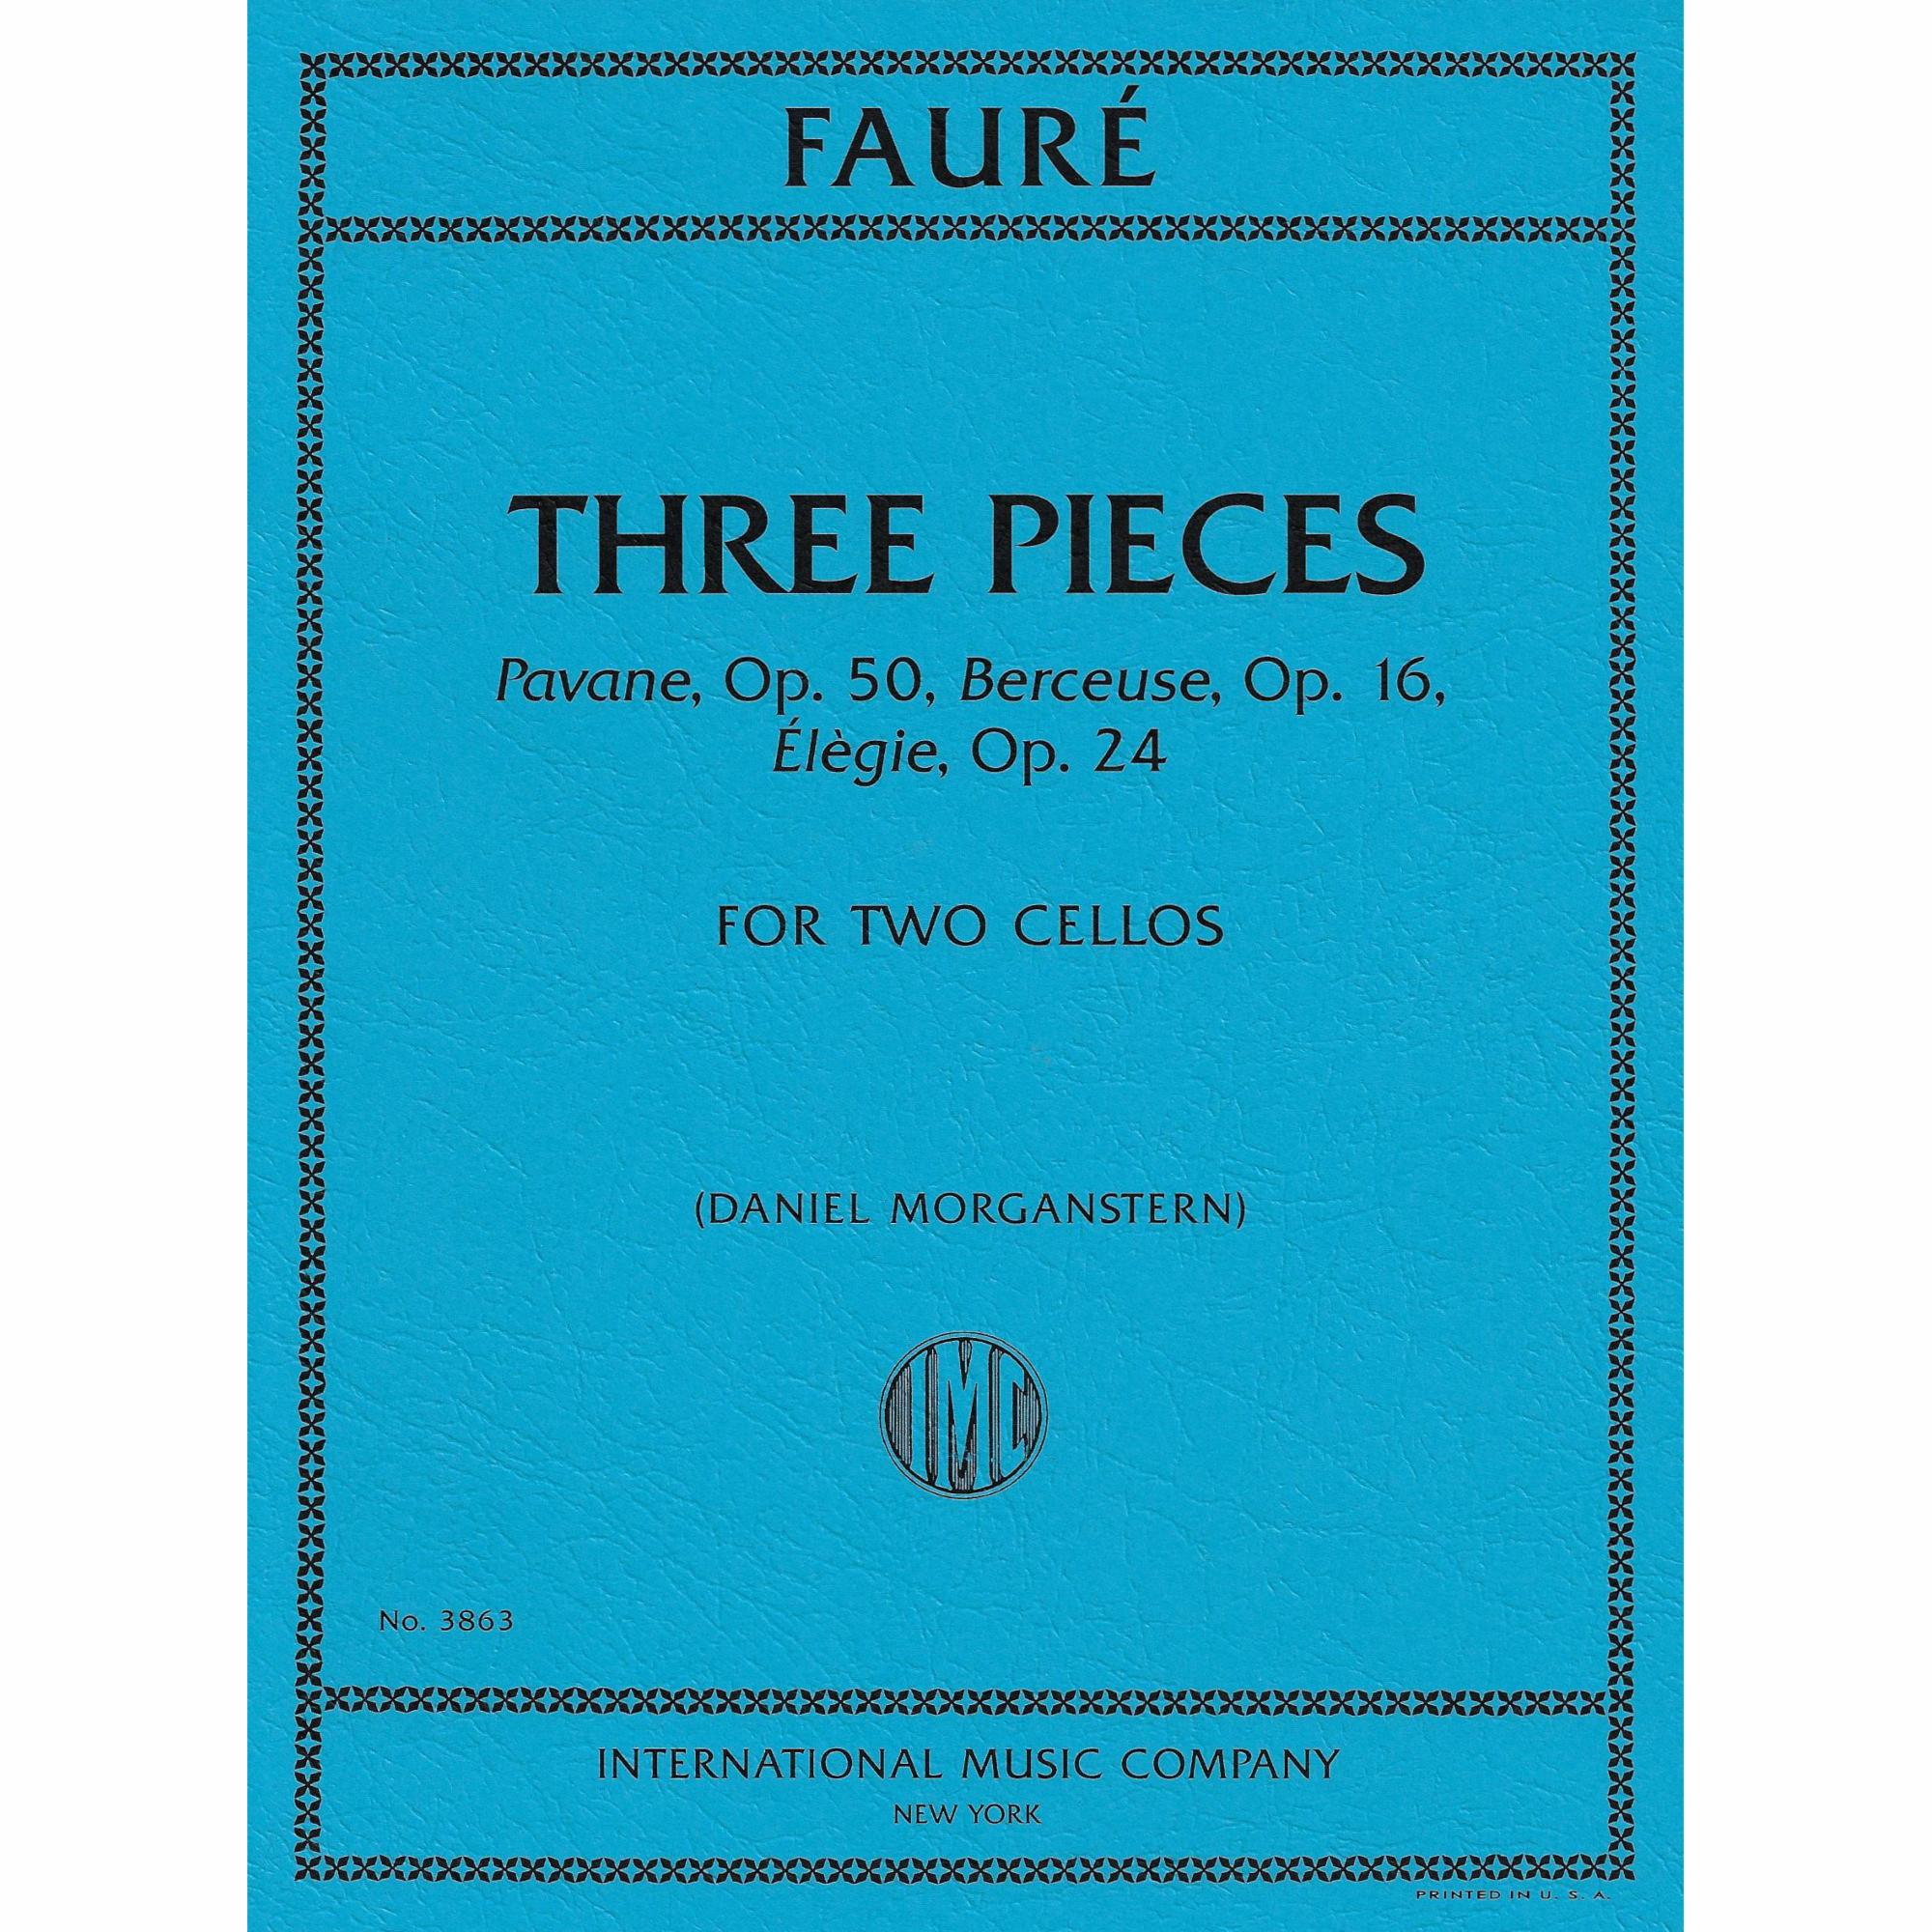 Faure -- Three Pieces for Two Cellos